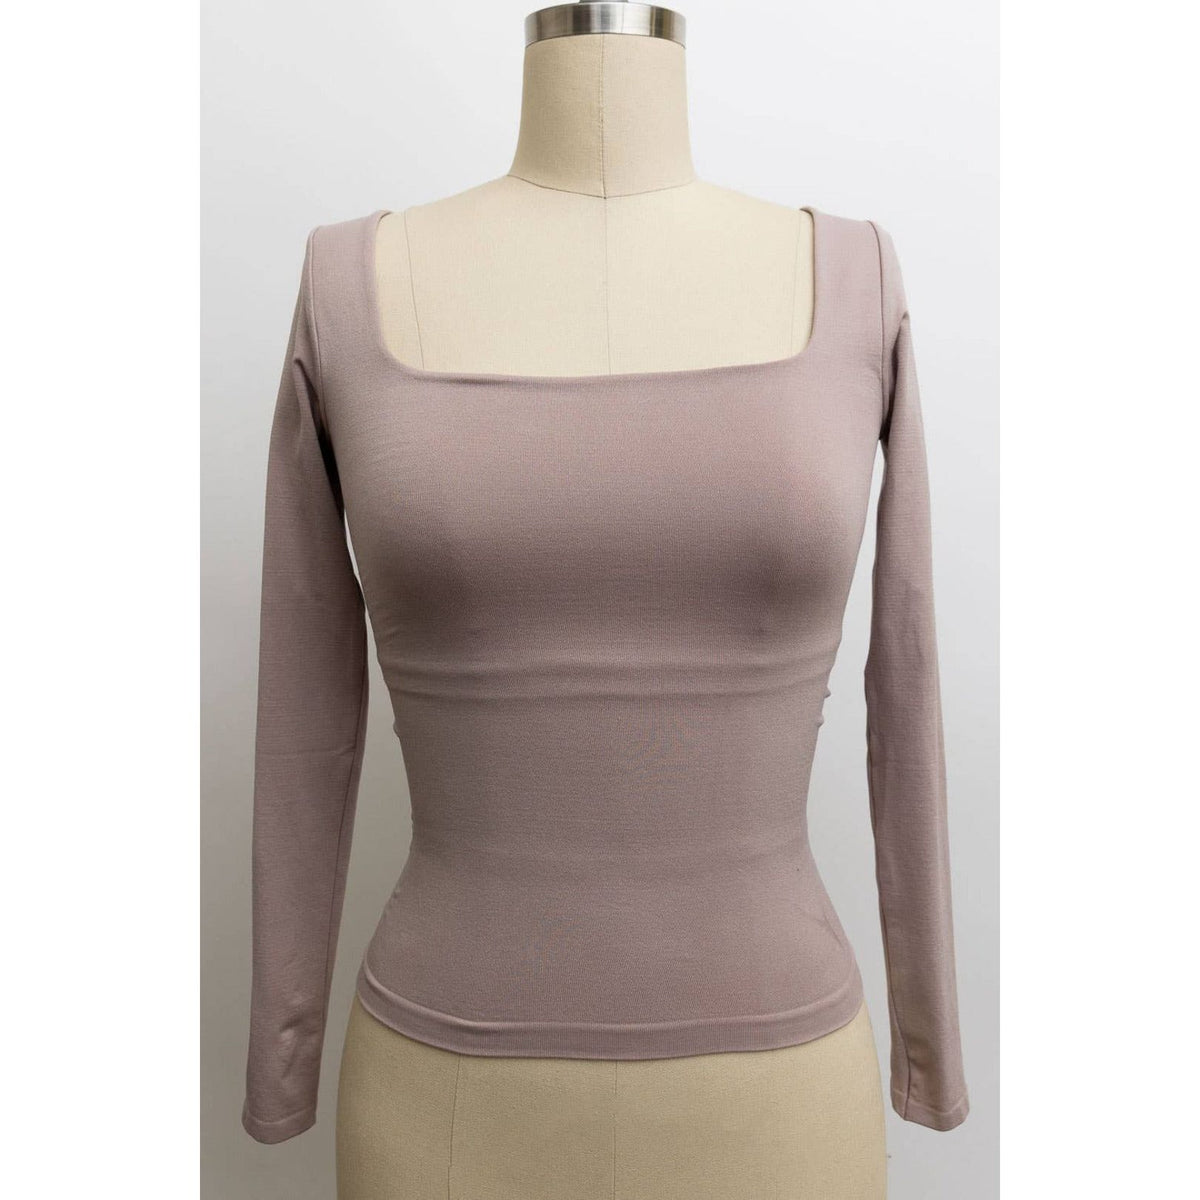 Long sleeve square neck top - Women's Clothing